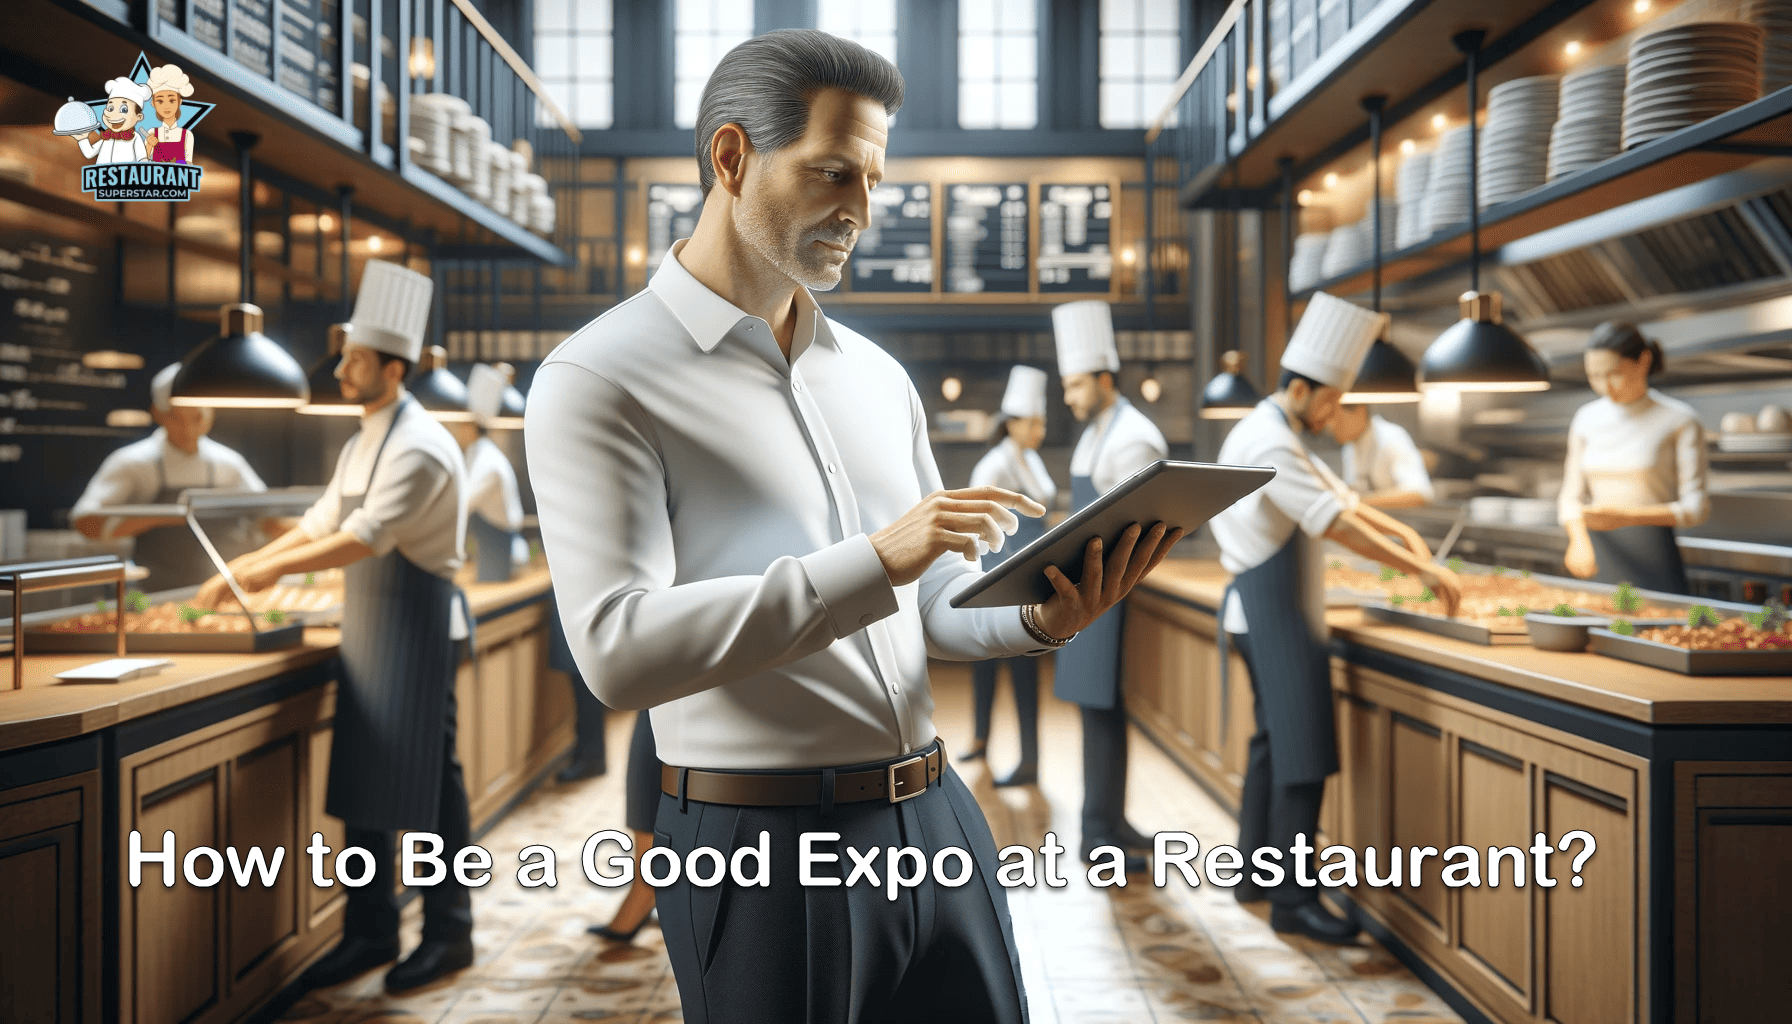 How to Be a Good Expo at a Restaurant?